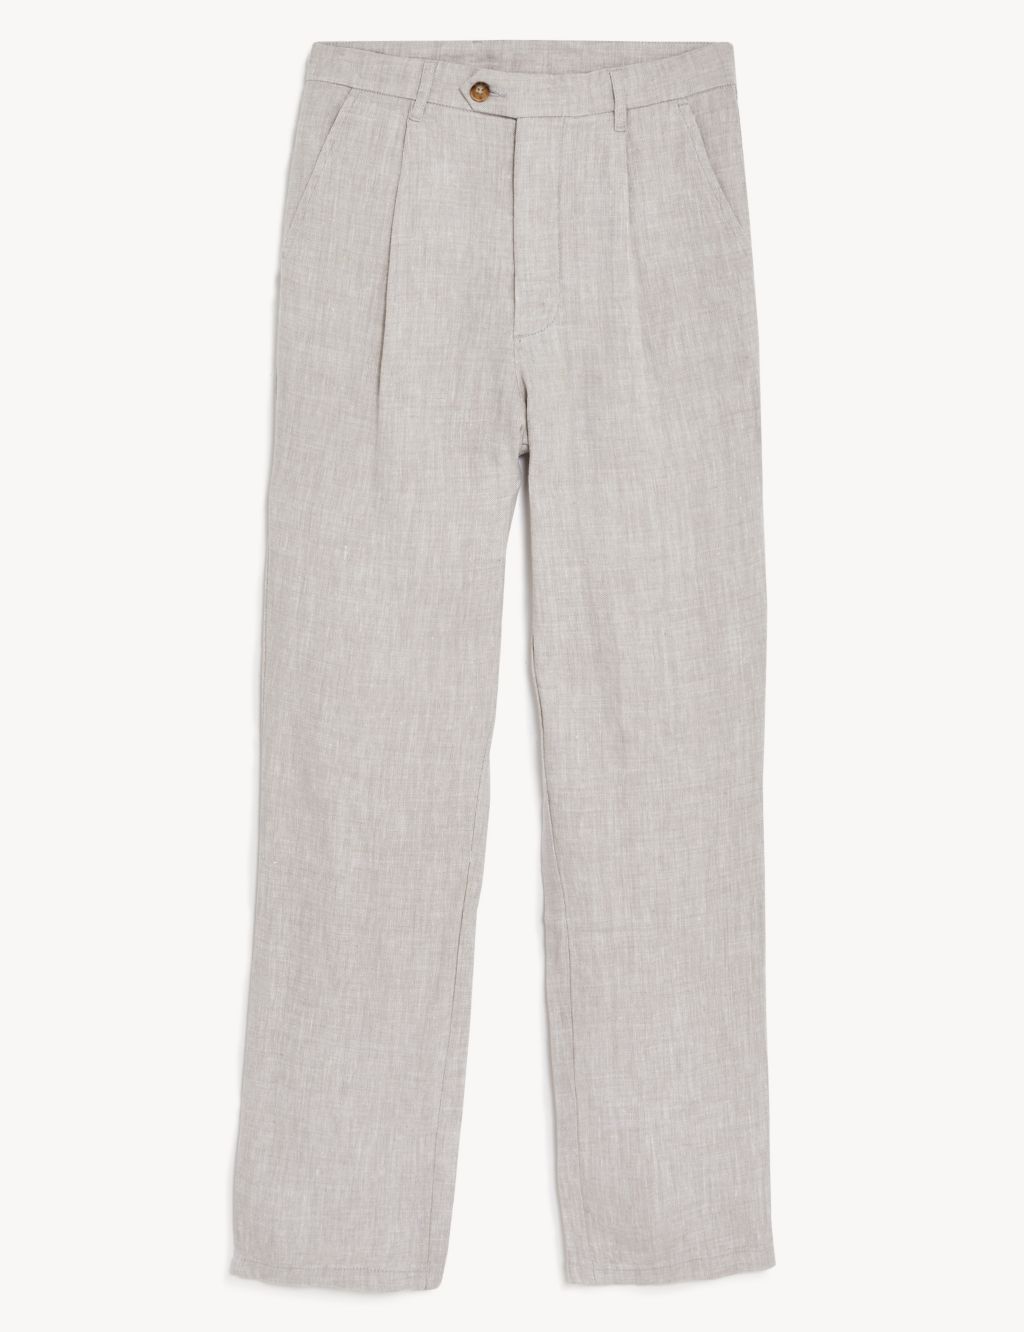 Tapered Fit Pure Linen Single Pleat Trousers image 2